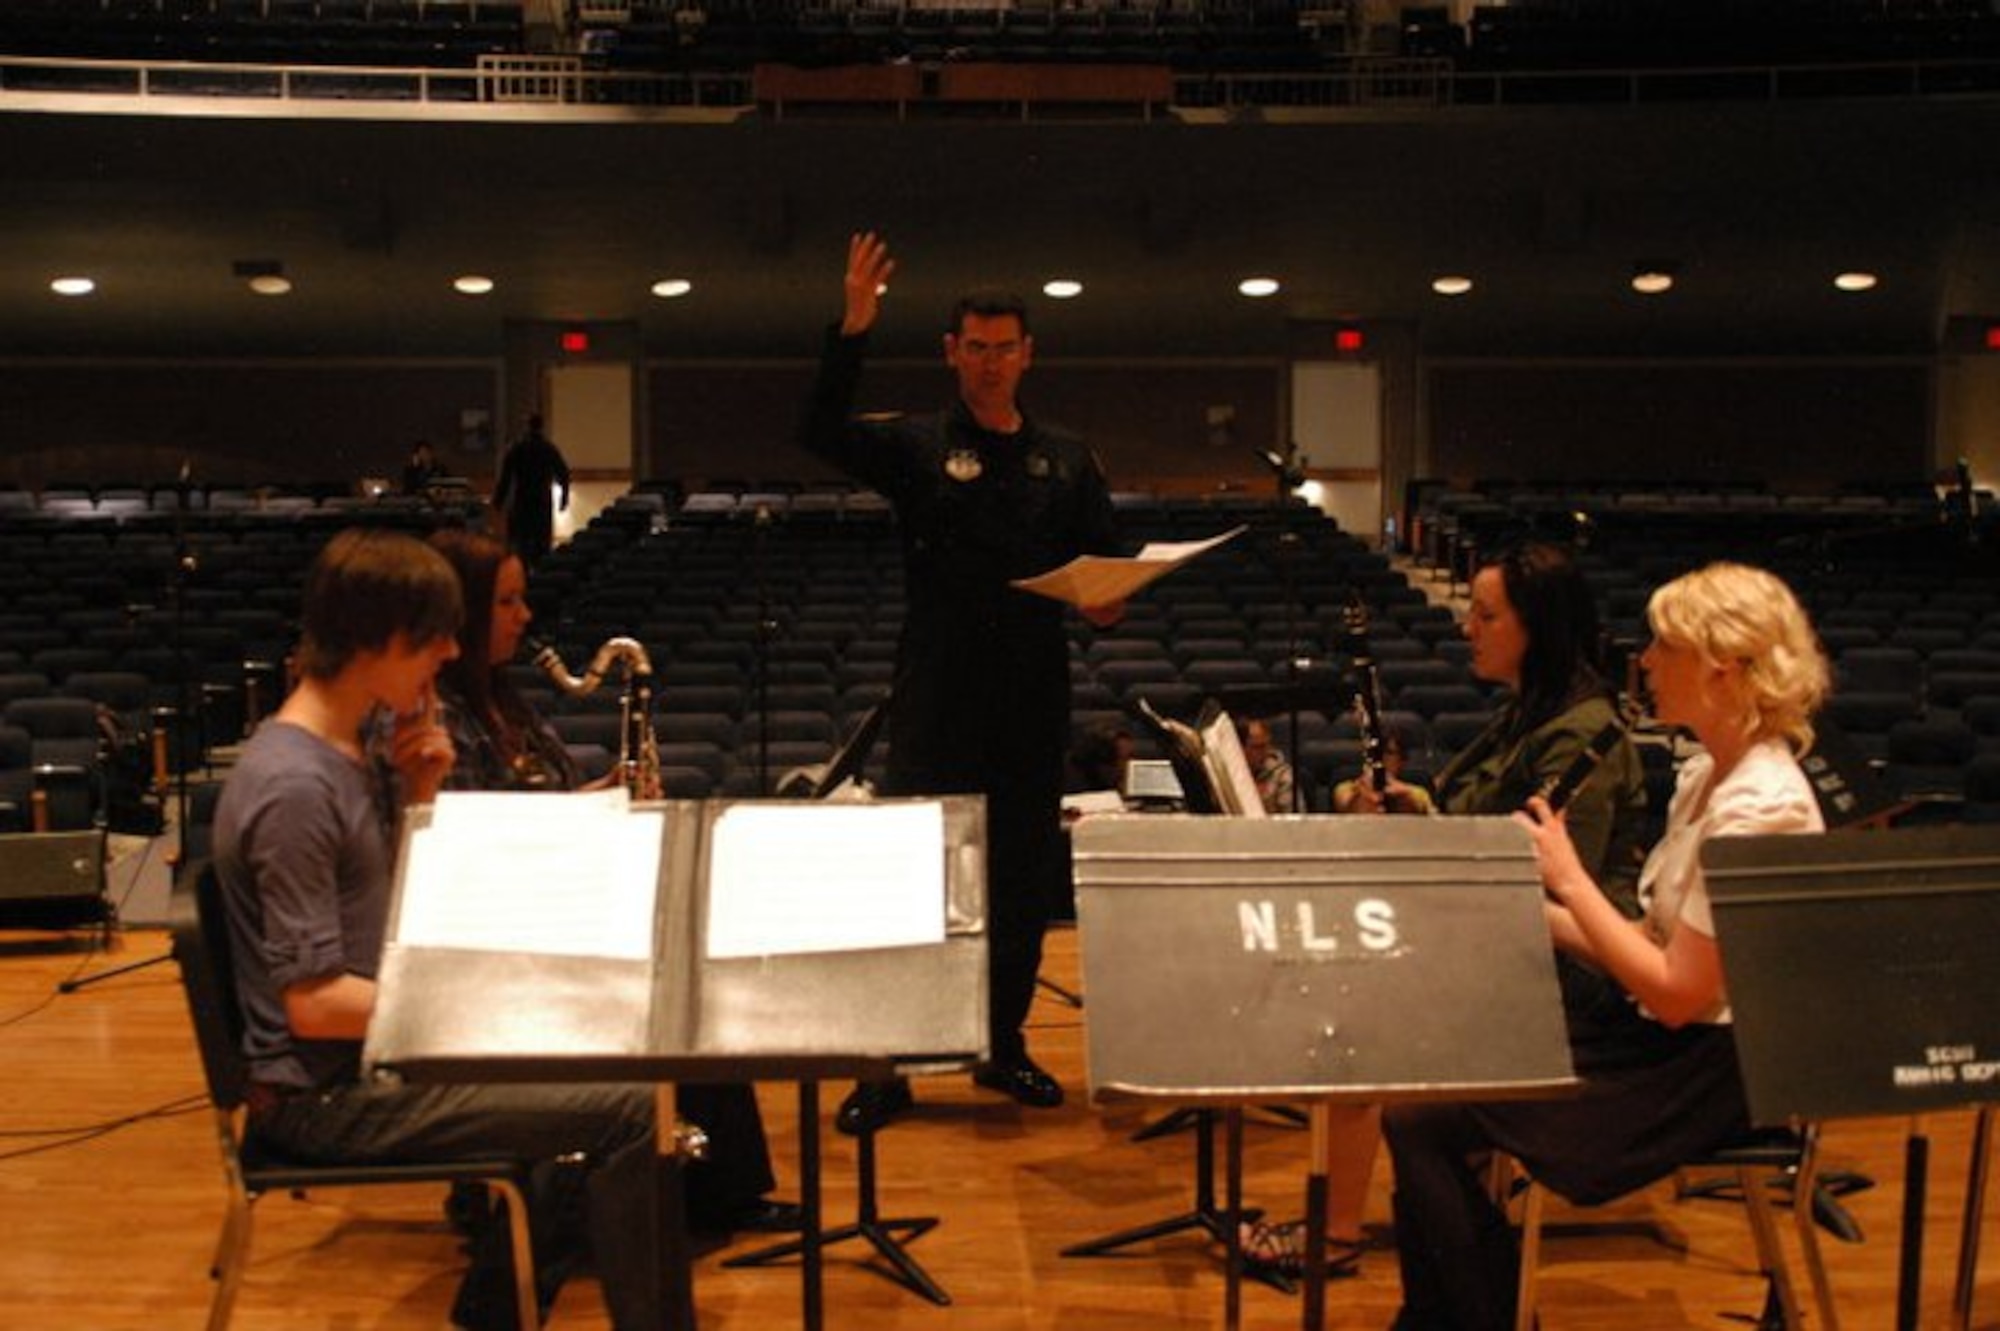 TSgt Alex Vieira coaches a clarinet quartet during a masterclass for the students at St. Cloud State University. Educational outreach is an important mission of the United States Air Force Academy Band, and Academy Winds brings decades of professional experience and knowledge to students around the country.